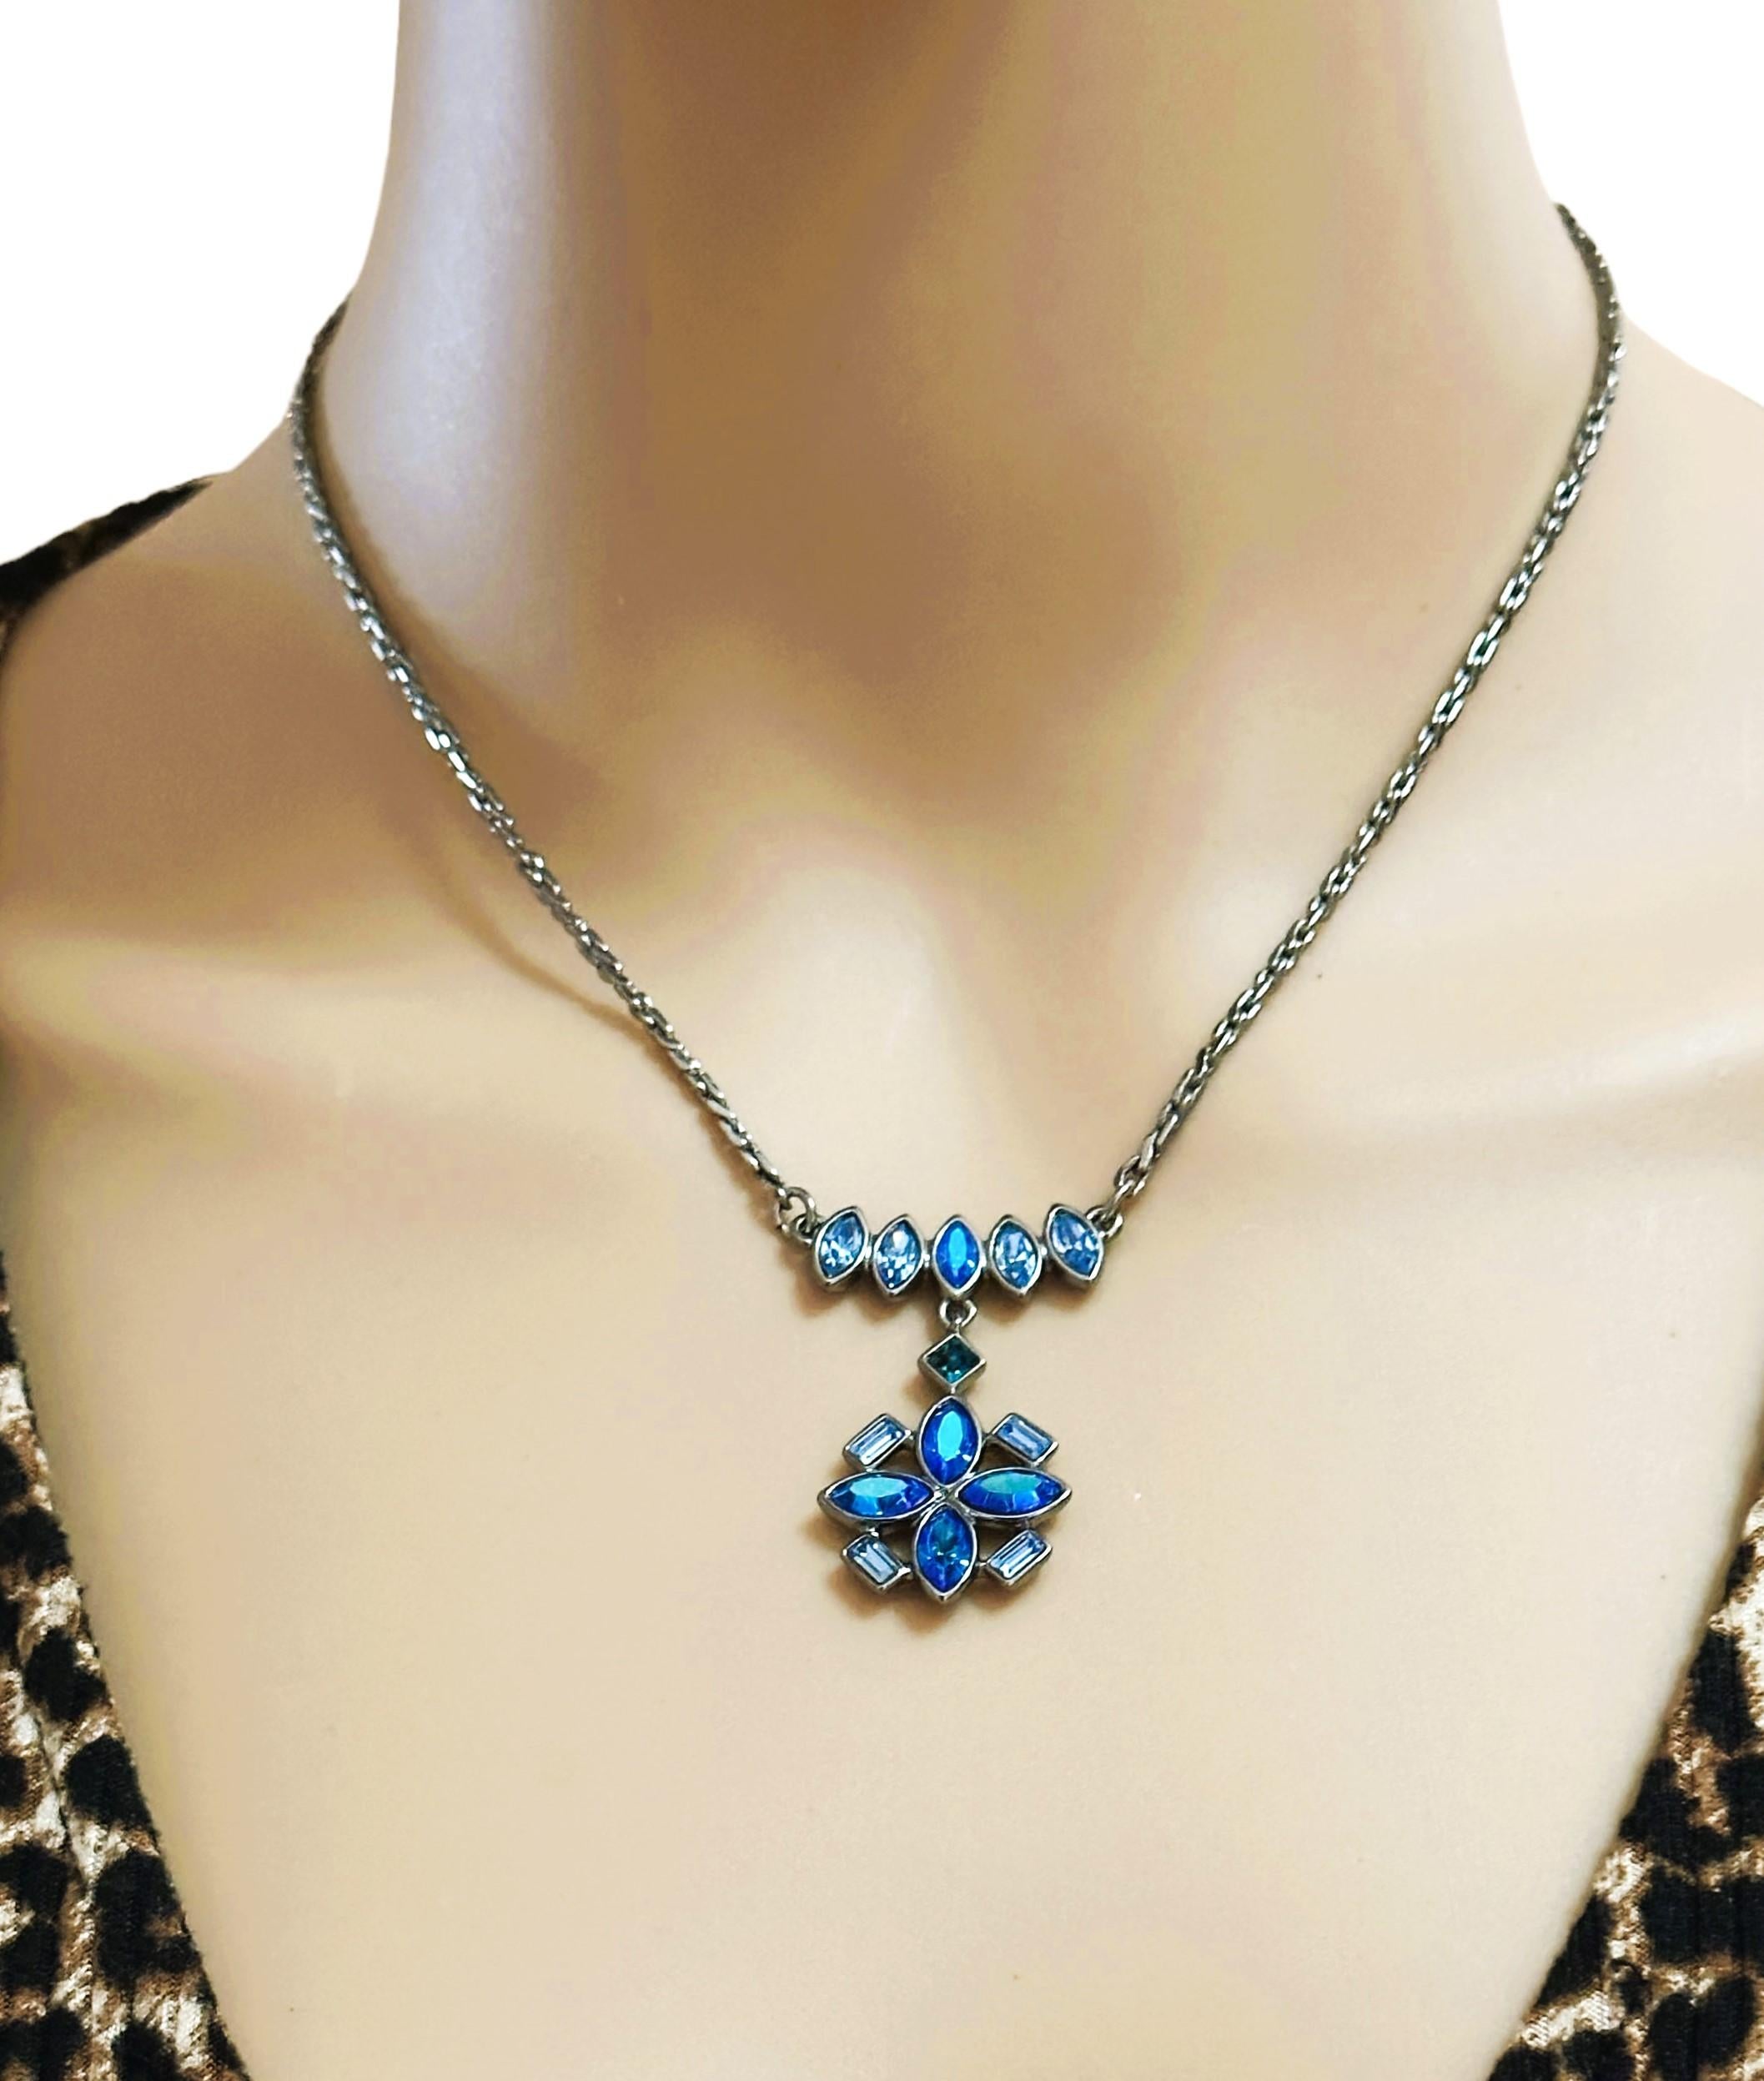 This is a gorgeous Vintage Givenchy Necklace with Variations of Blue stones that are different shapes and sizes.  It is masterfully made with an exquisite  design.  The clasp is marked 